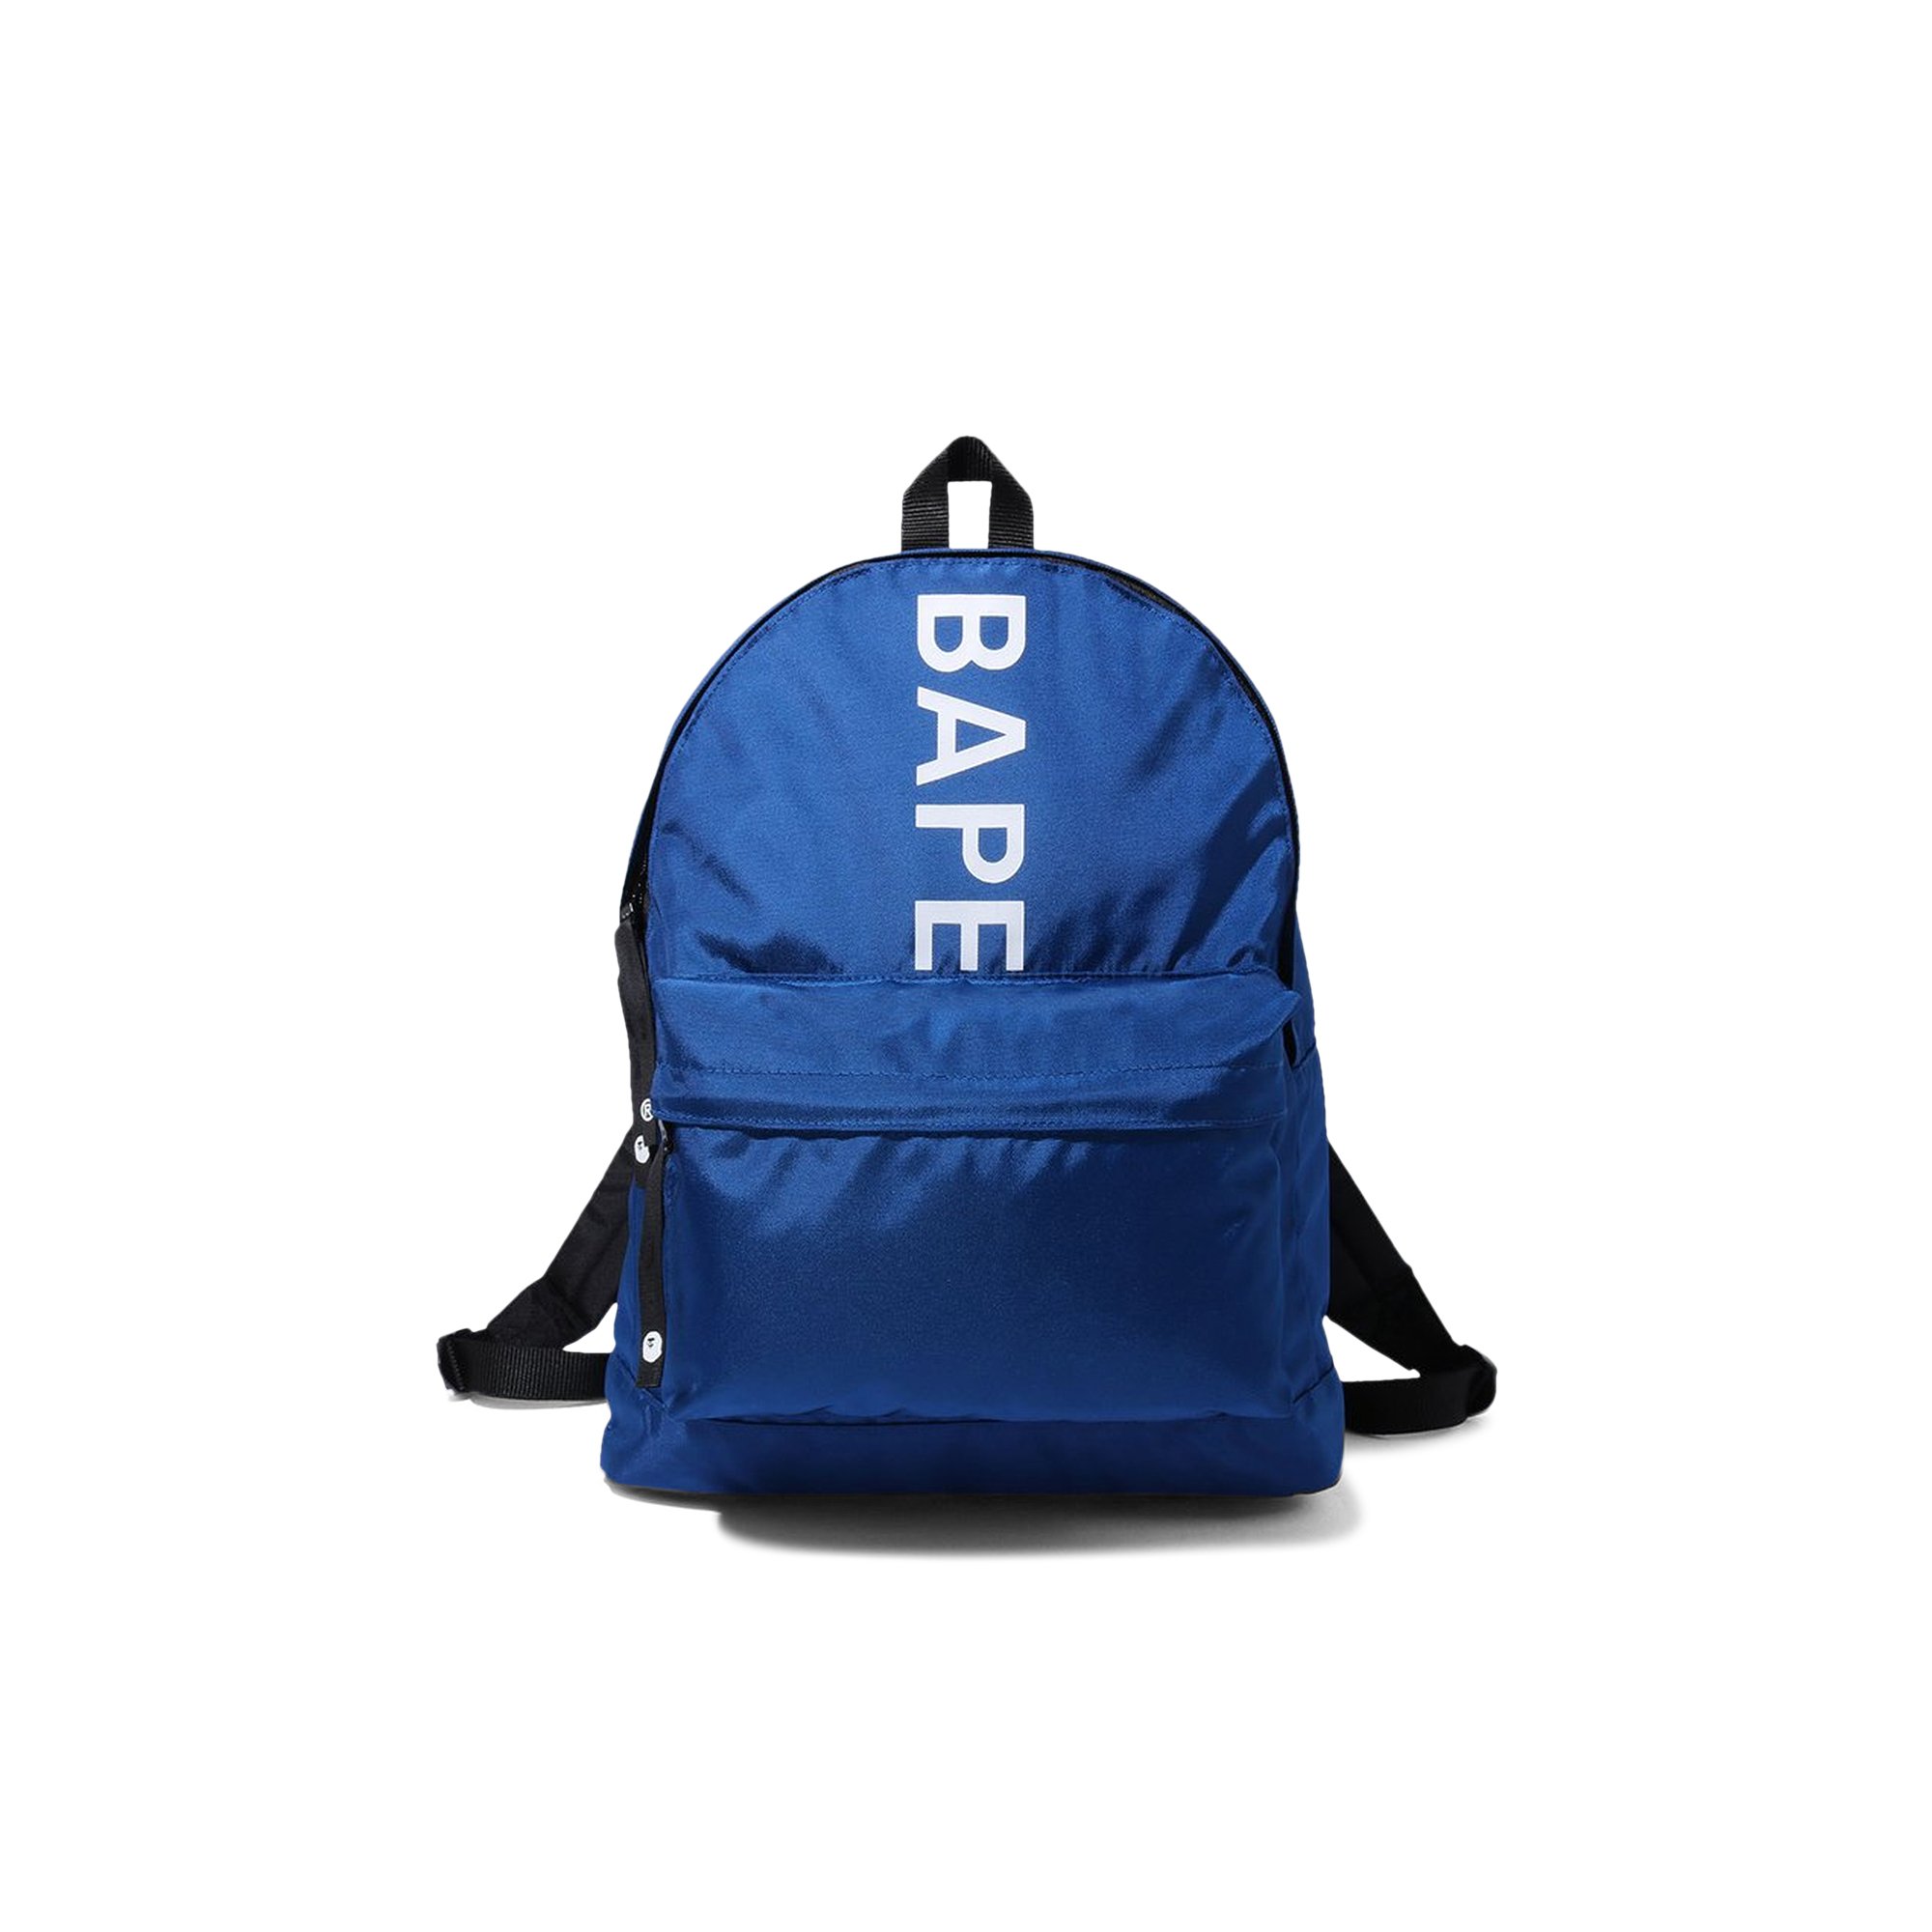 Buy BAPE Happy New Year Backpack 2020 (5 Pieces) 'Navy' - 1G20 182